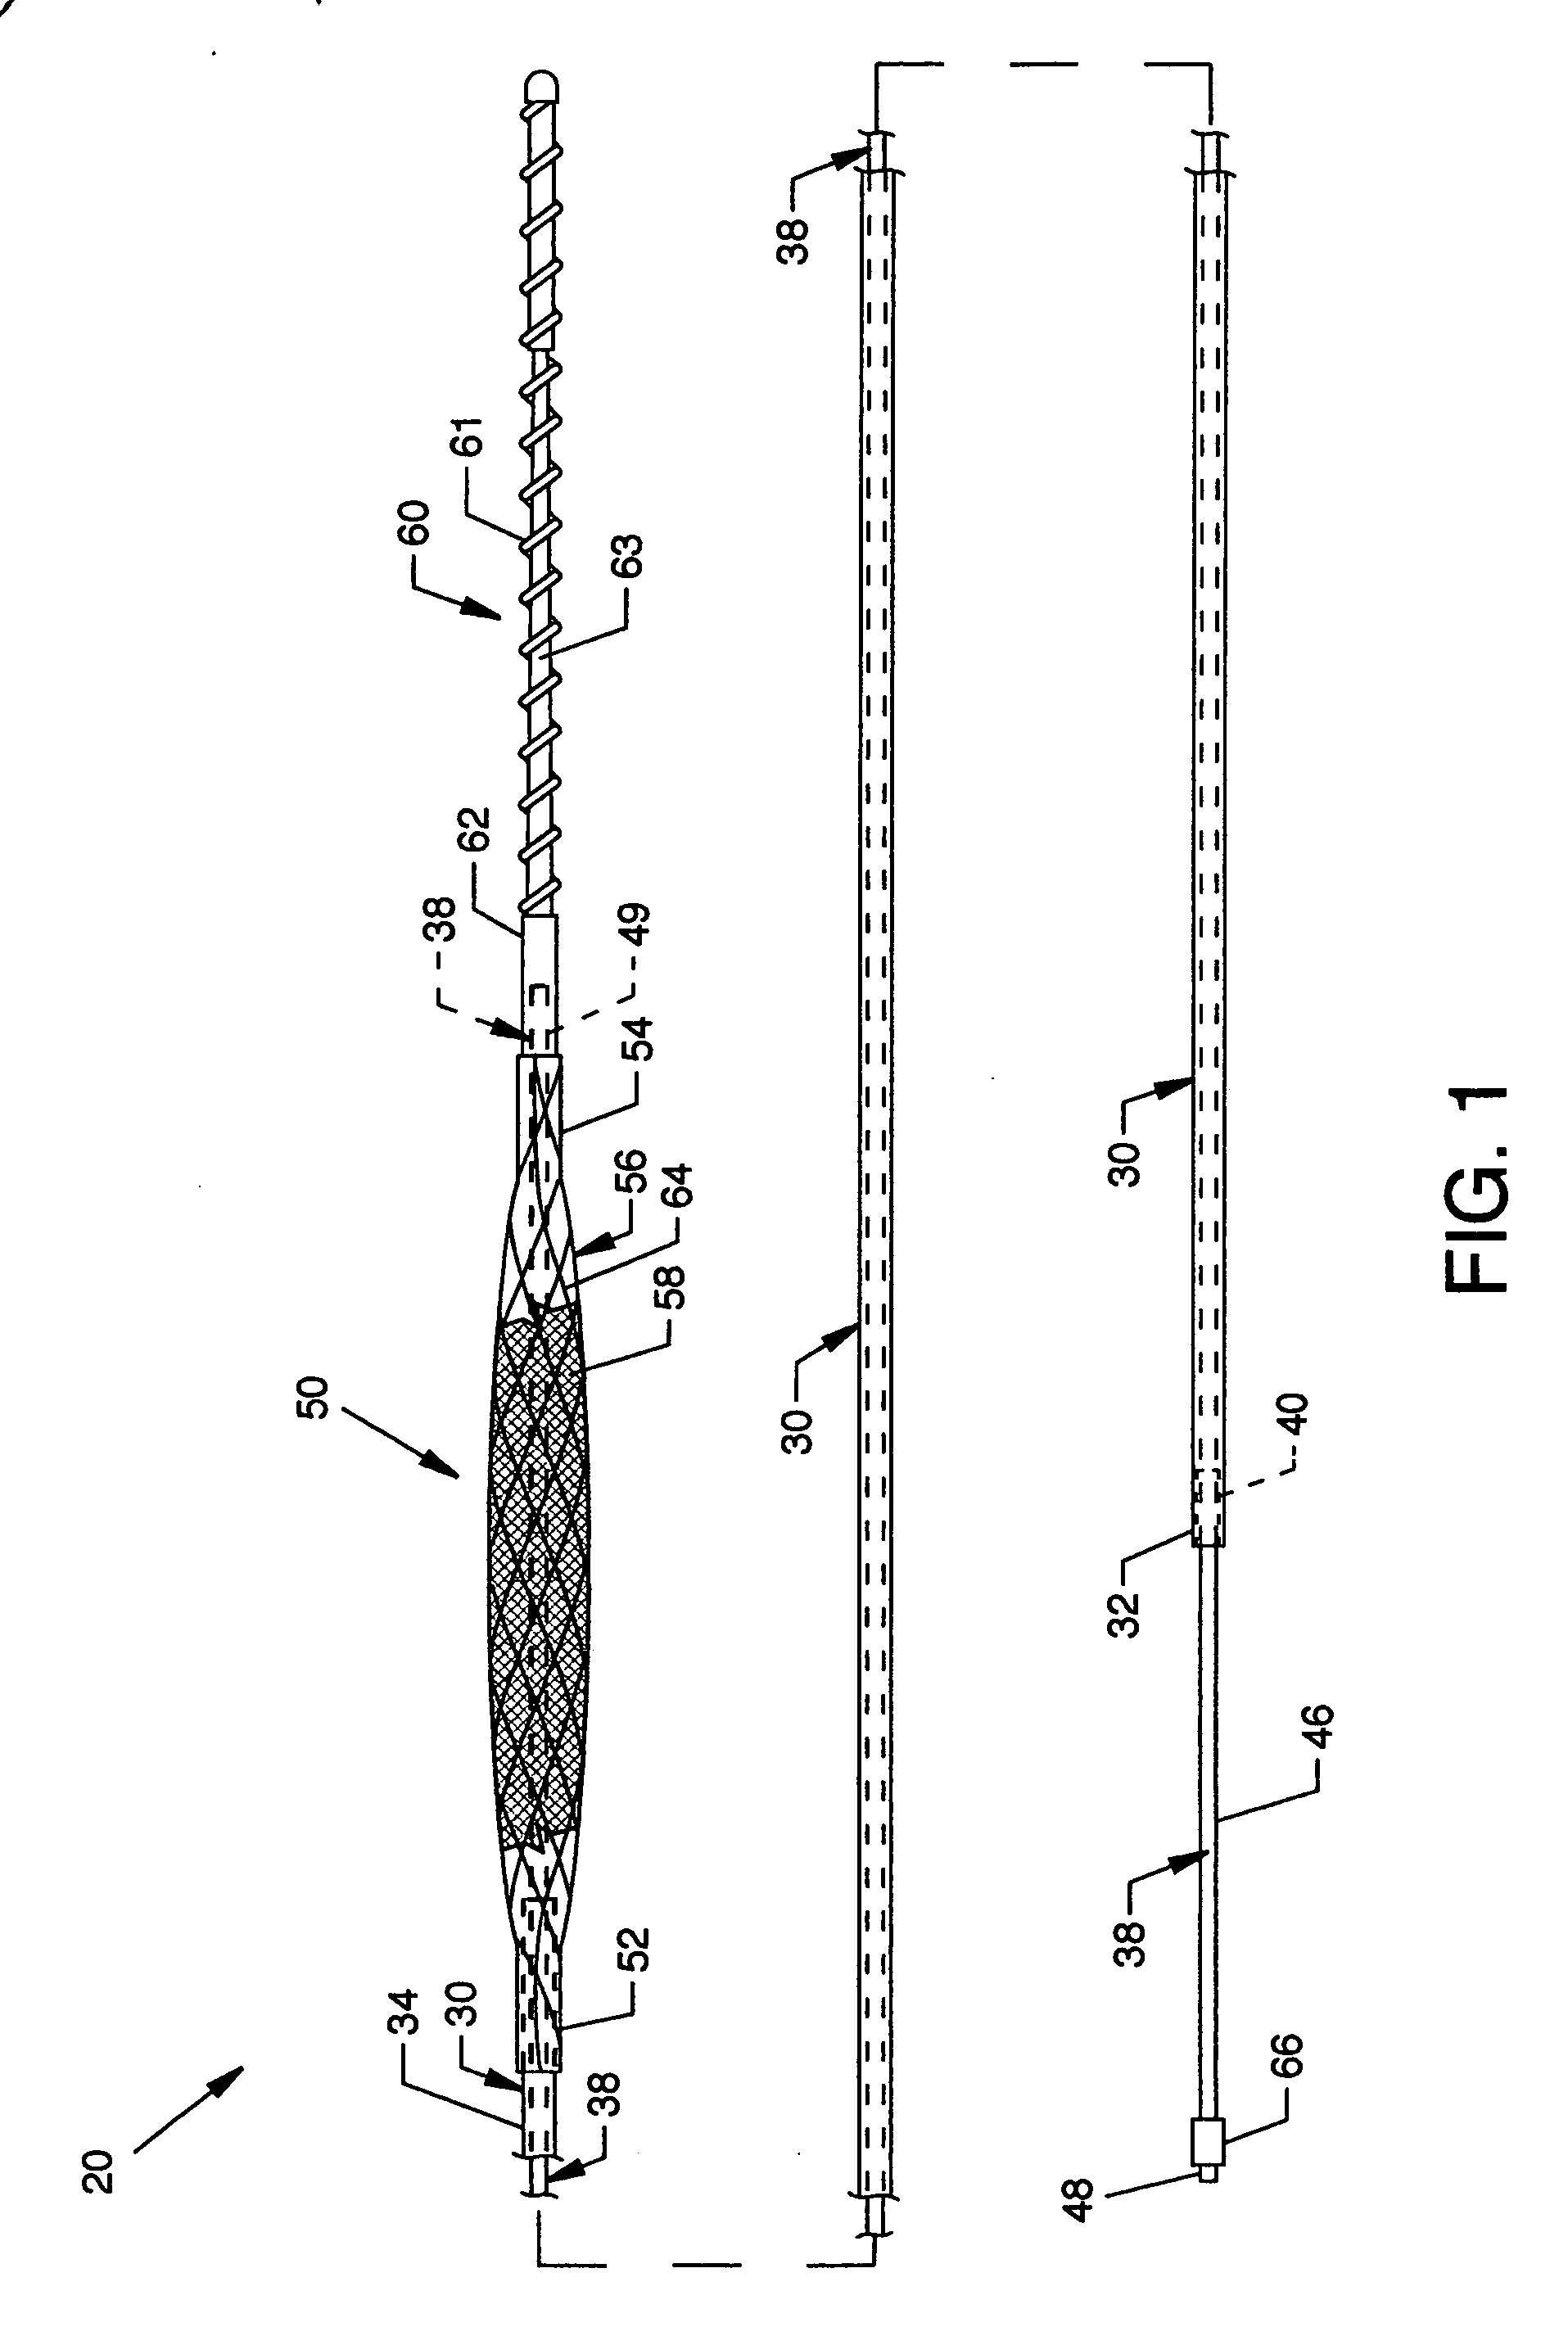 Guidewire having deployable sheathless protective filter